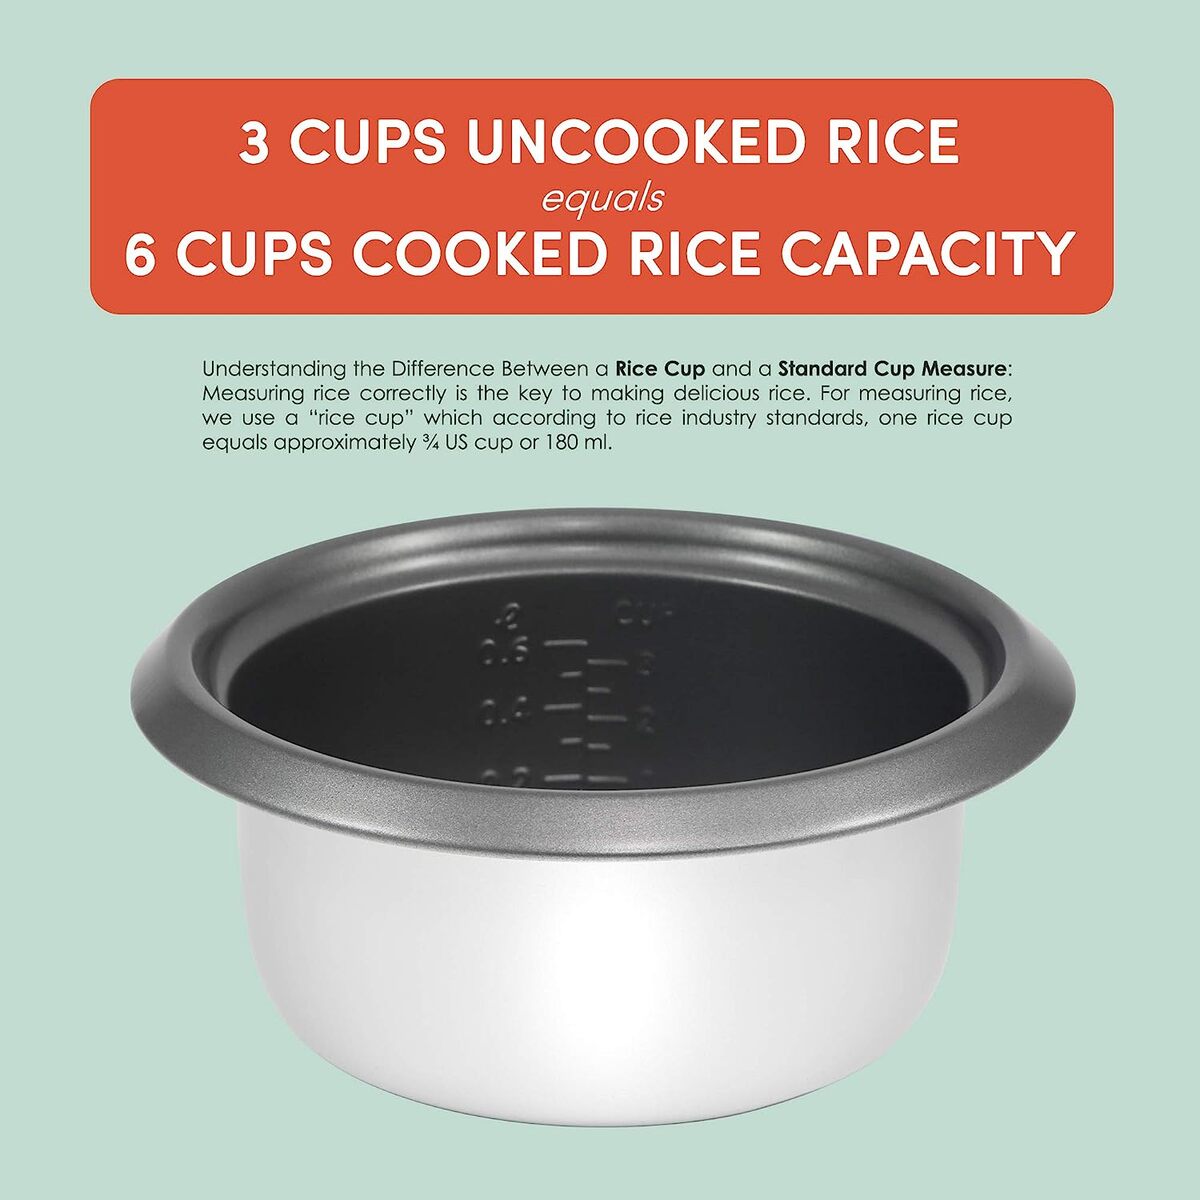 Elite Gourmet 6 Cup Nonstick Rice Cooker with Steam Tray